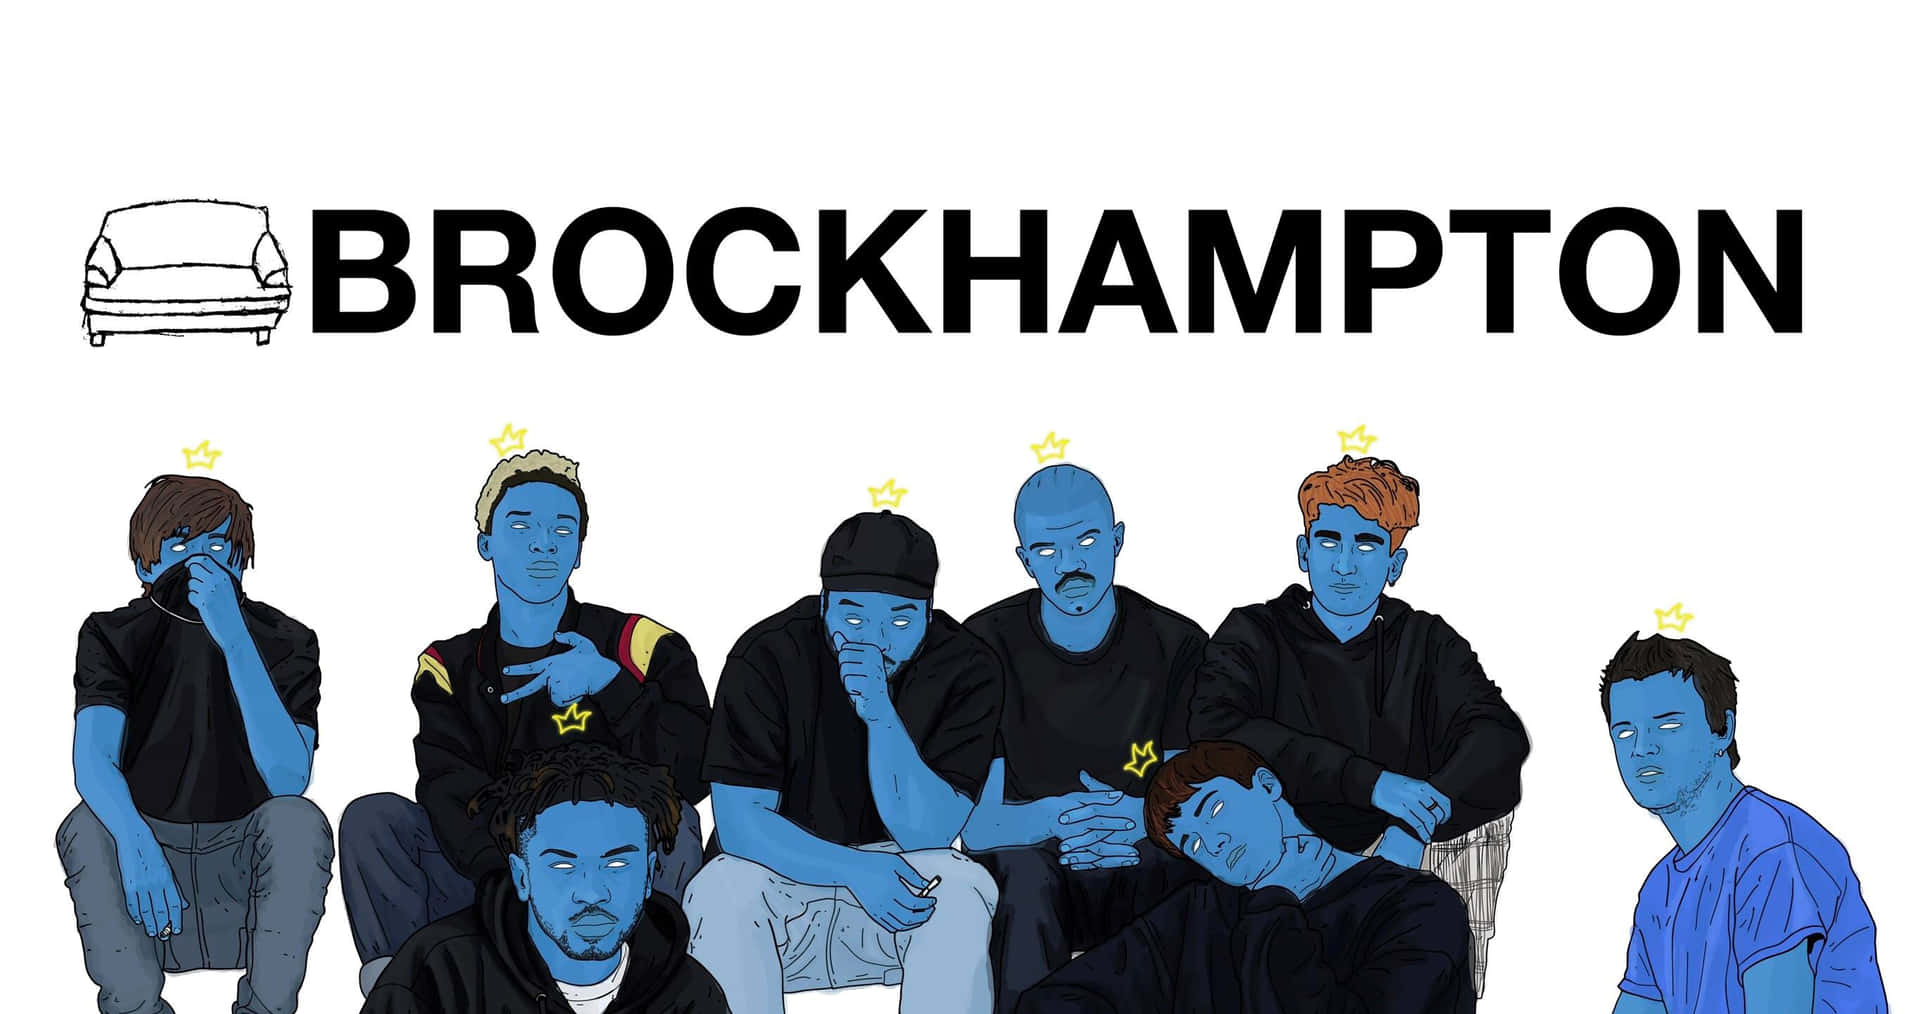 The vibrant and talented BROCKHAMPTON group posing together for a stylish photo shoot Wallpaper